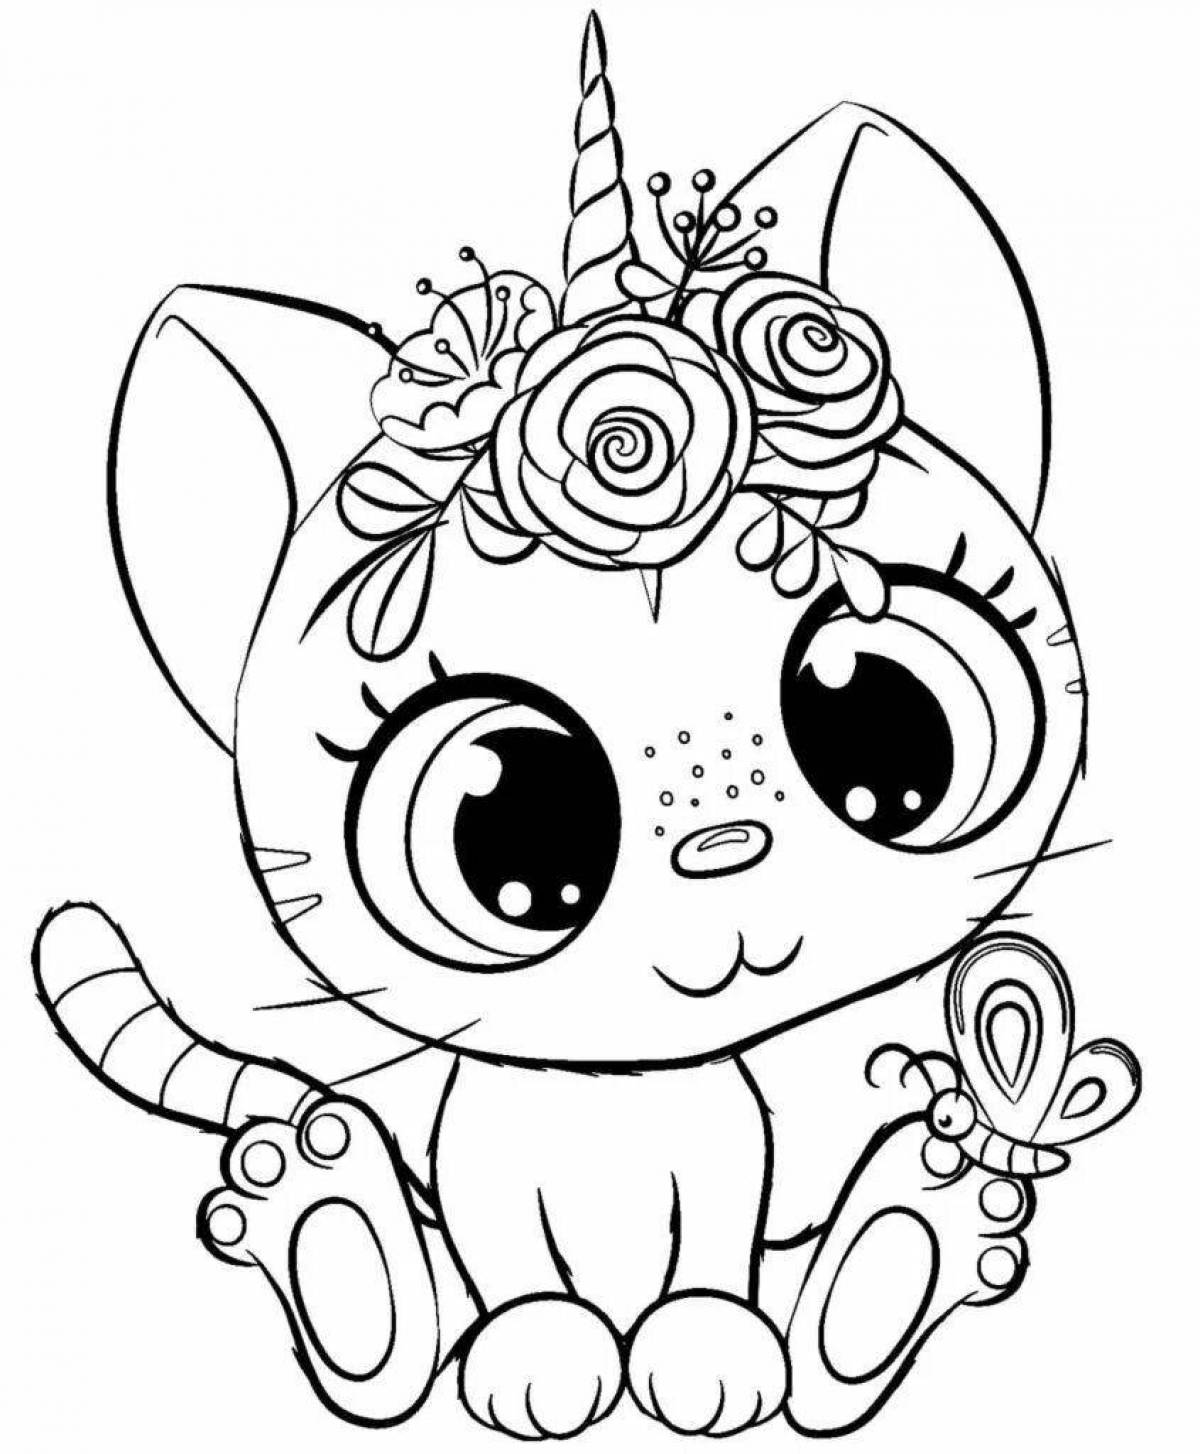 Sweet rainbow kitten coloring page